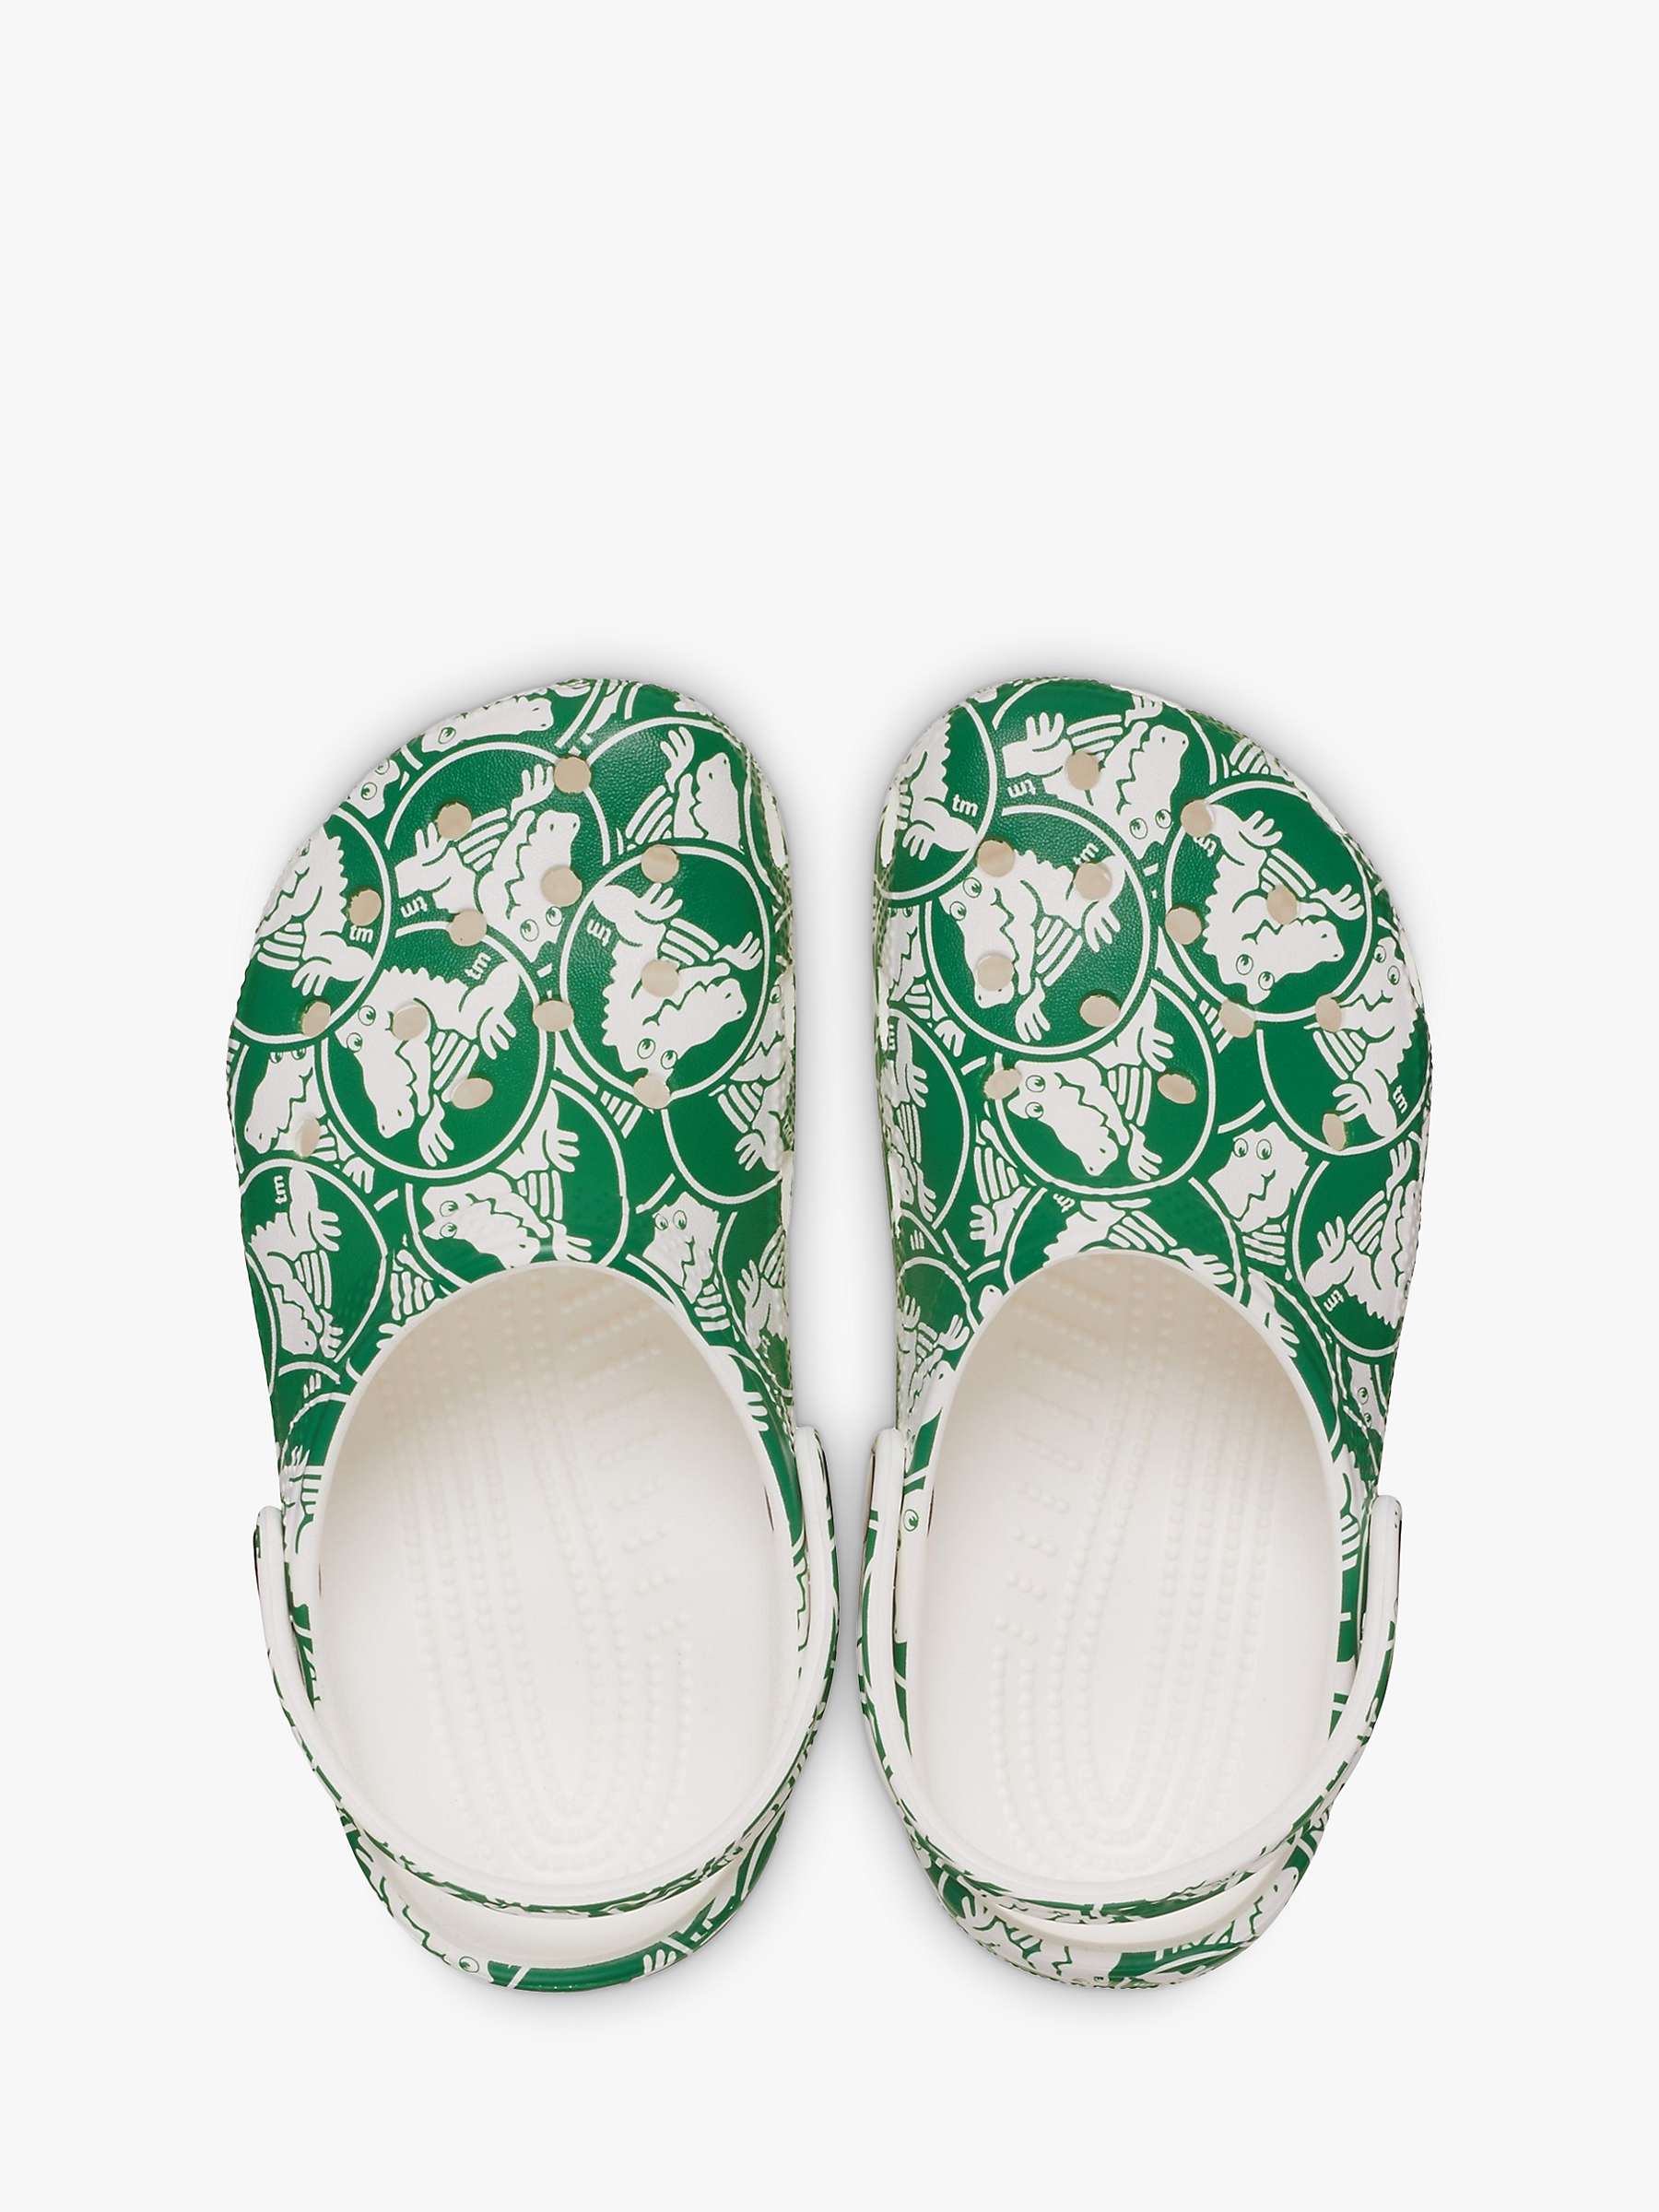 Buy Crocs Kids' Classic Graphic Clogs, Green/White Online at johnlewis.com